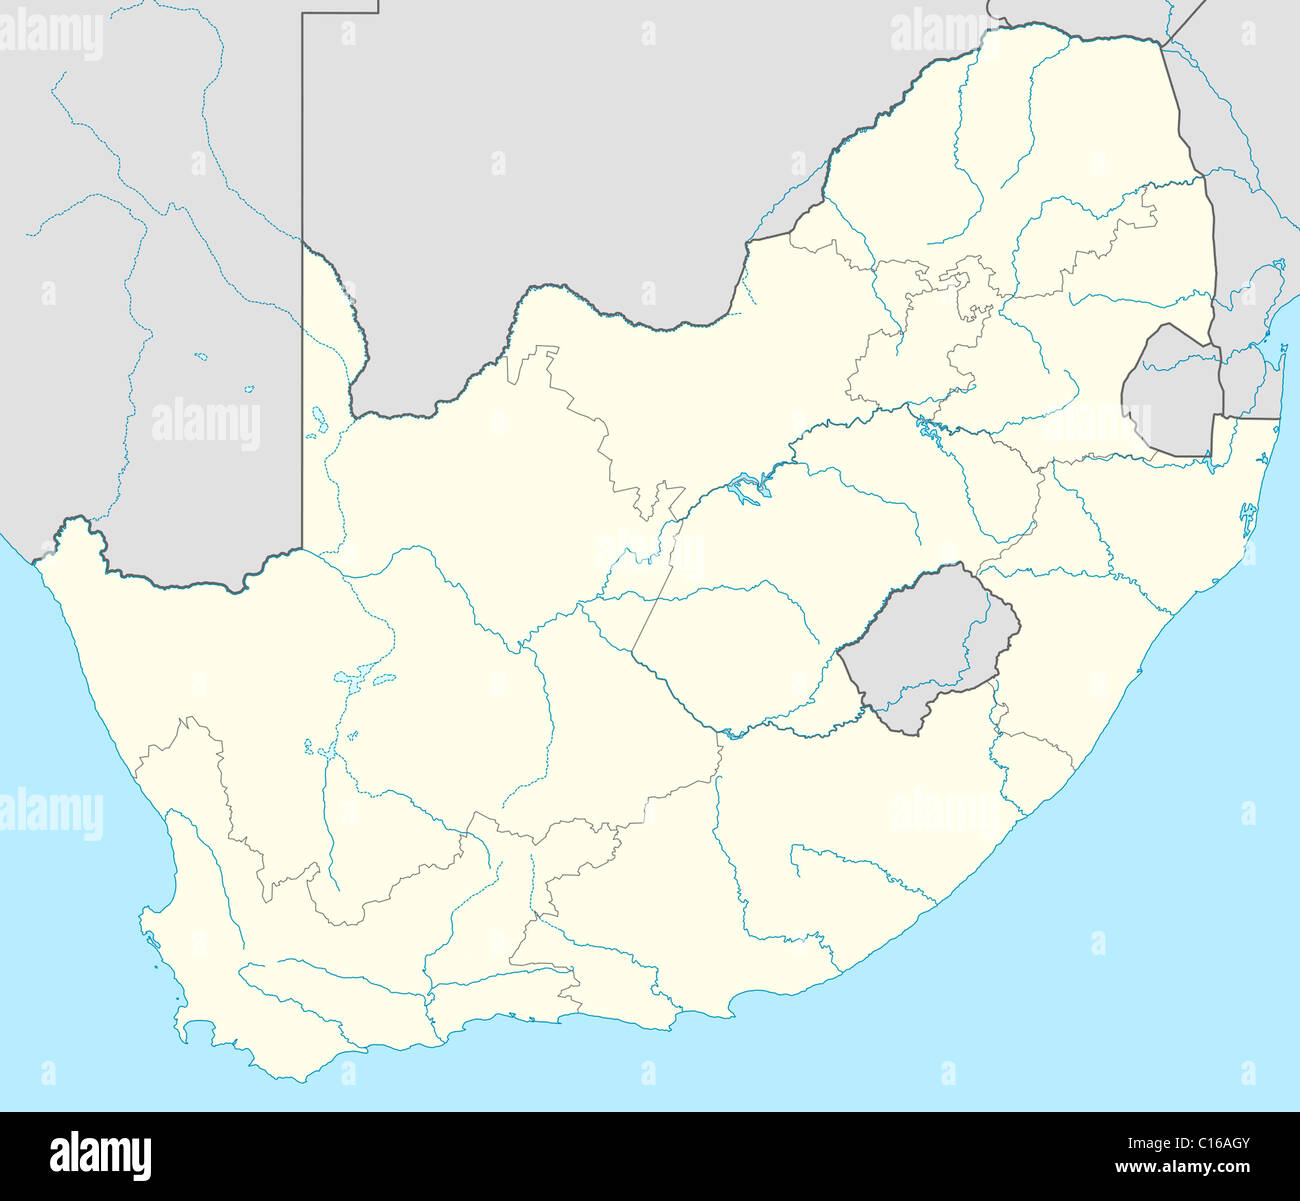 Illustration of South Africa map showing the state borders. Stock Photo